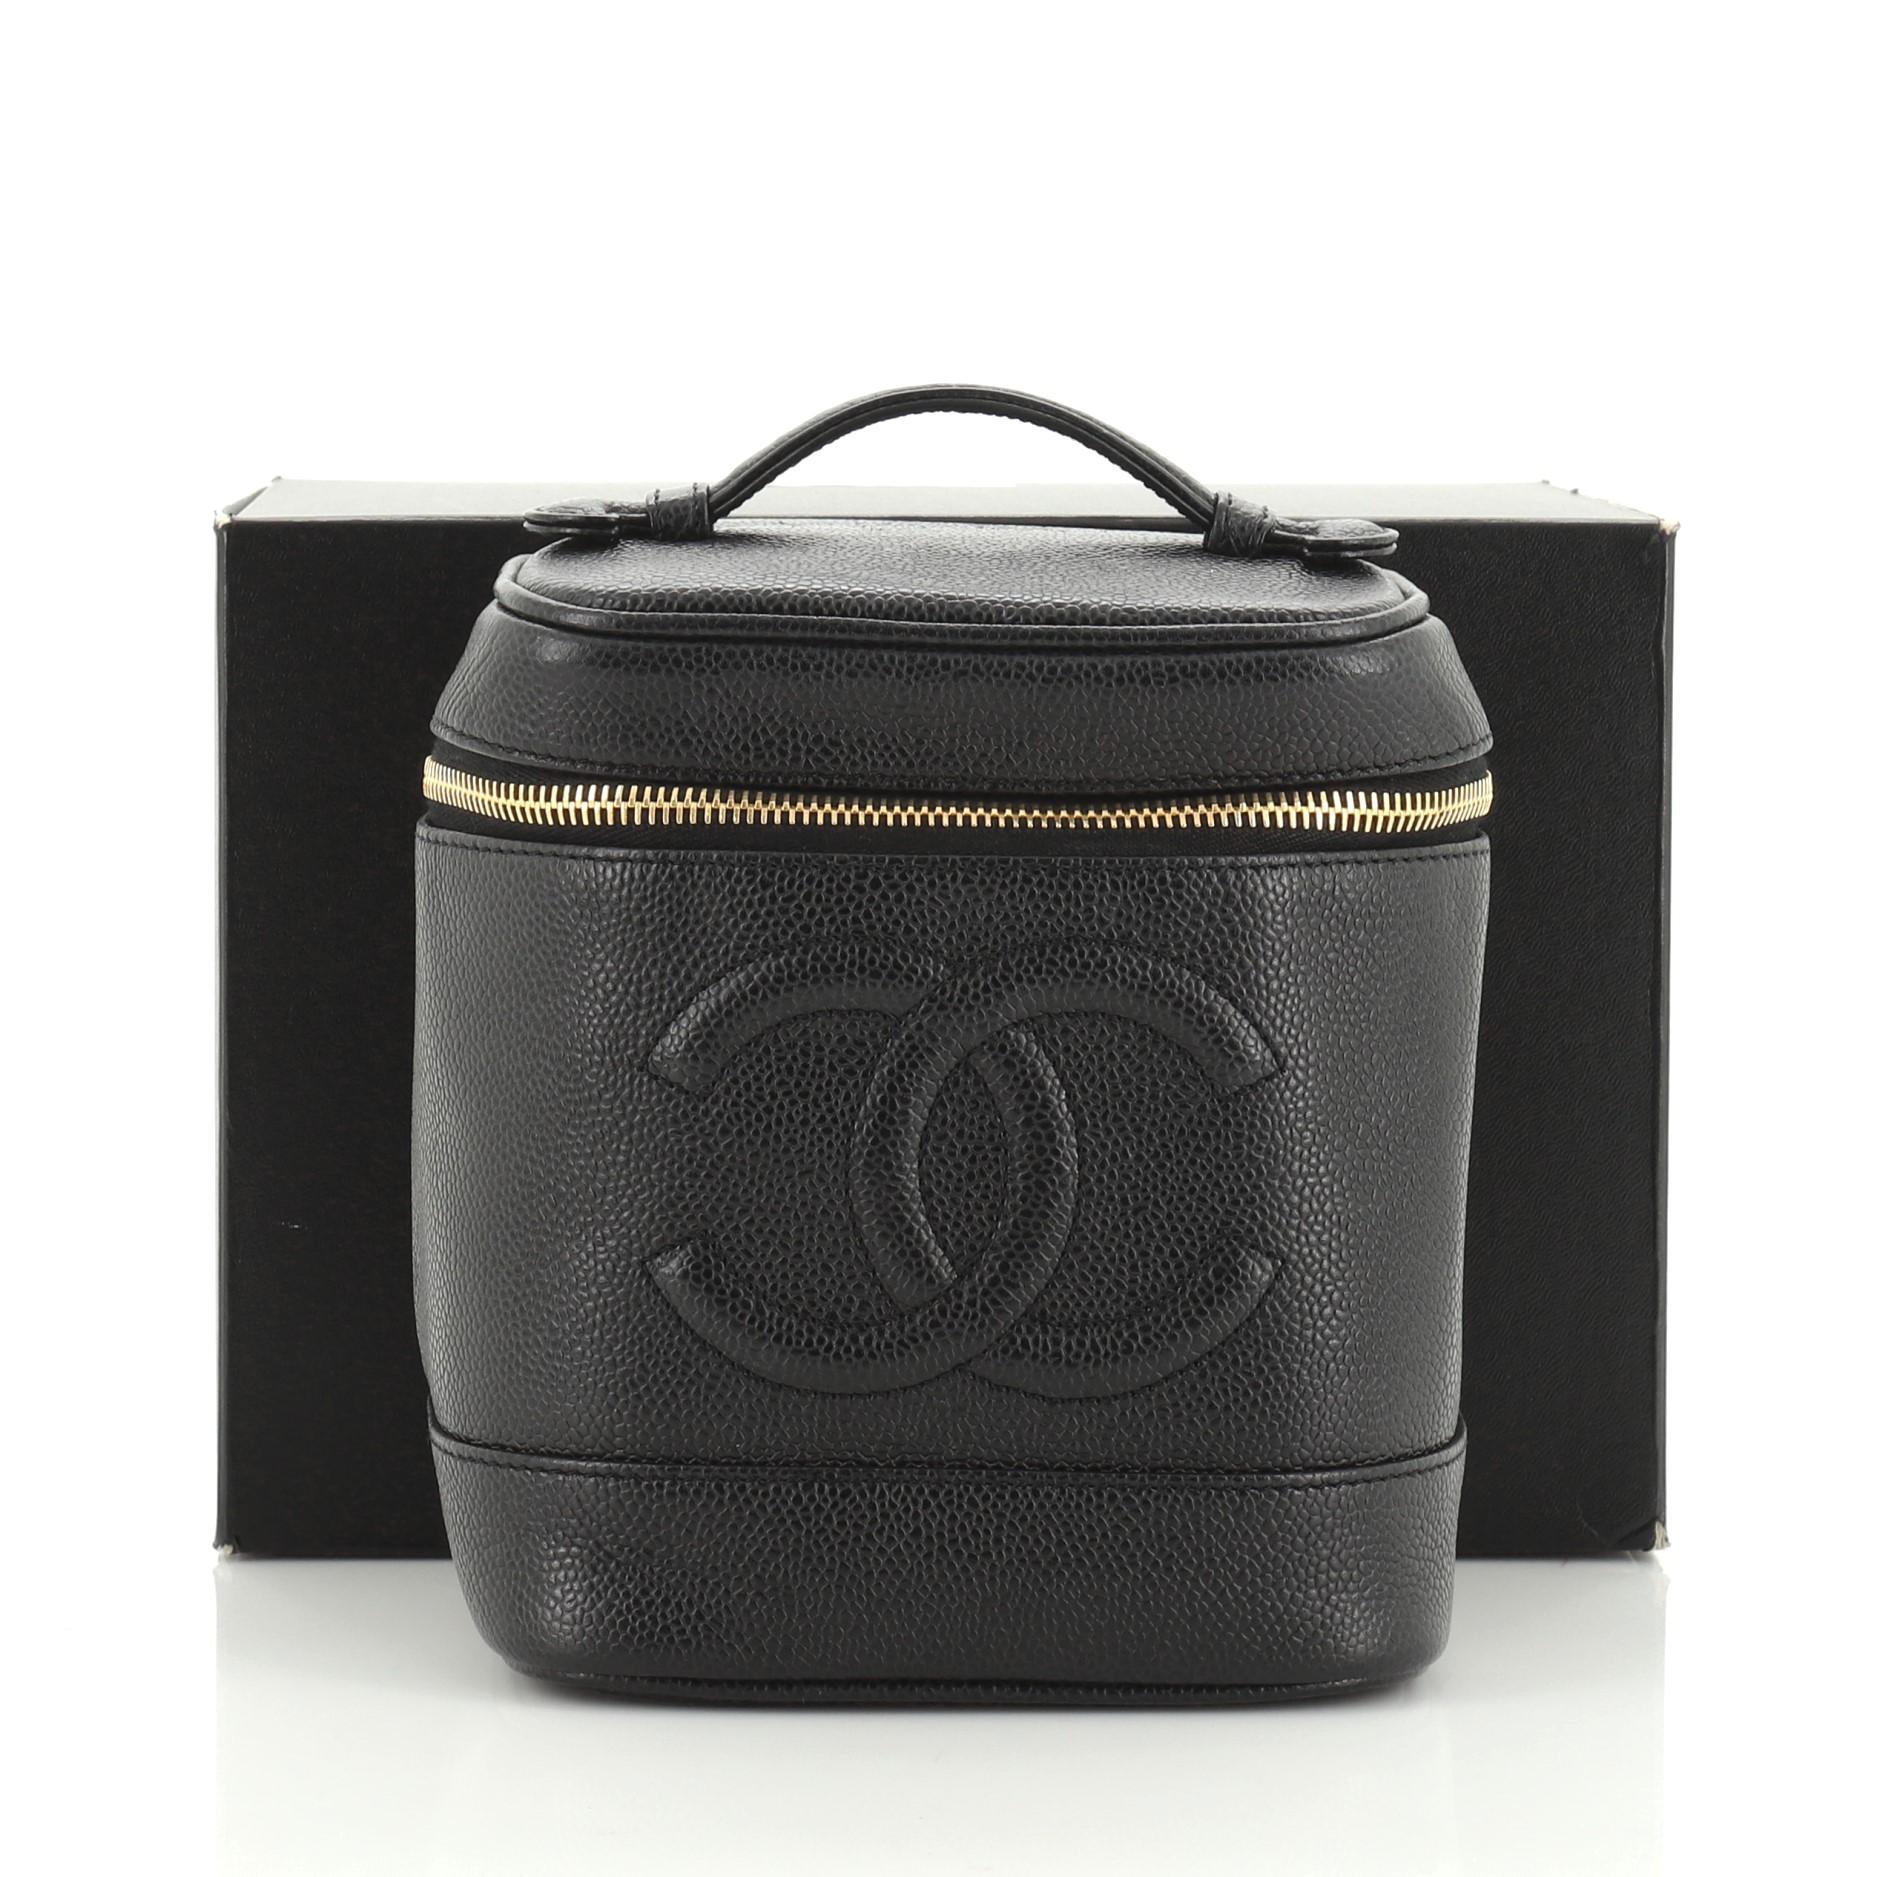 This Chanel Vintage Timeless Cosmetic Case Caviar Tall, crafted in black caviar leather, features a single loop top handle, CC logo at the center and aged gold-tone hardware. Its zip-around closure opens to a black leather interior with slip pocket.